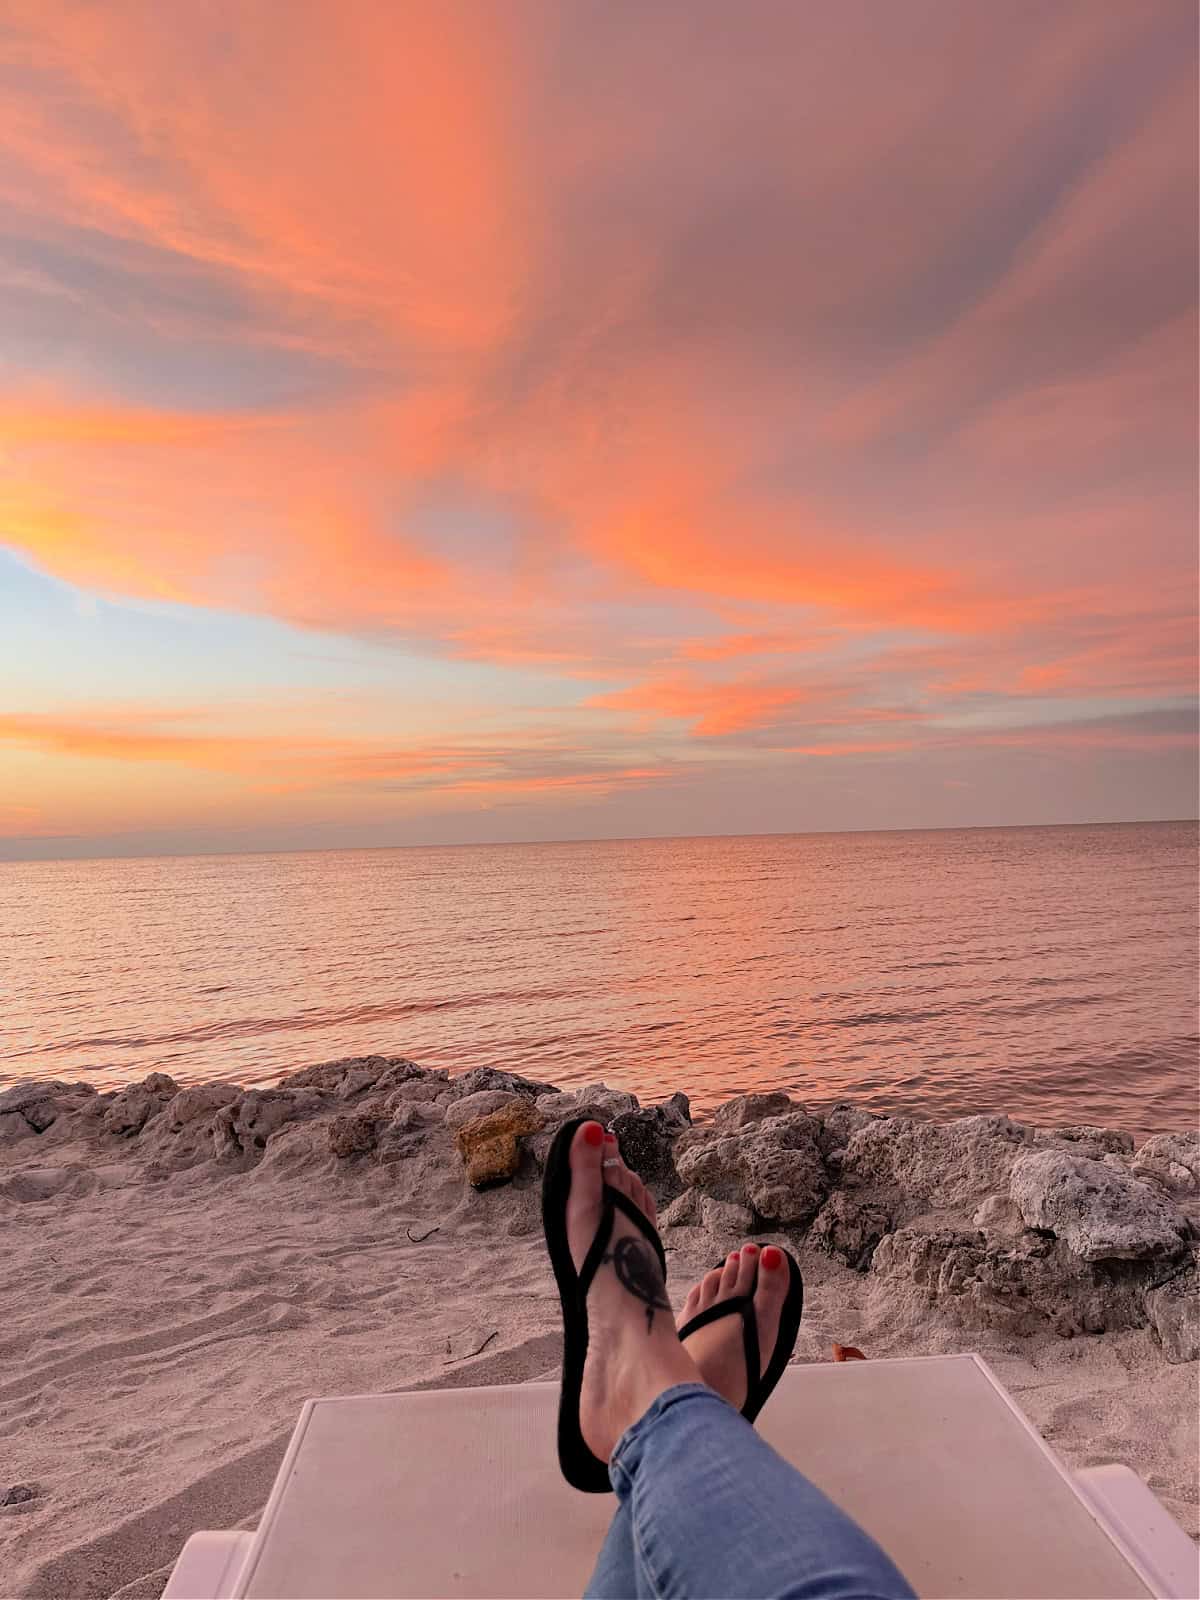 sandals on the beach at sunset